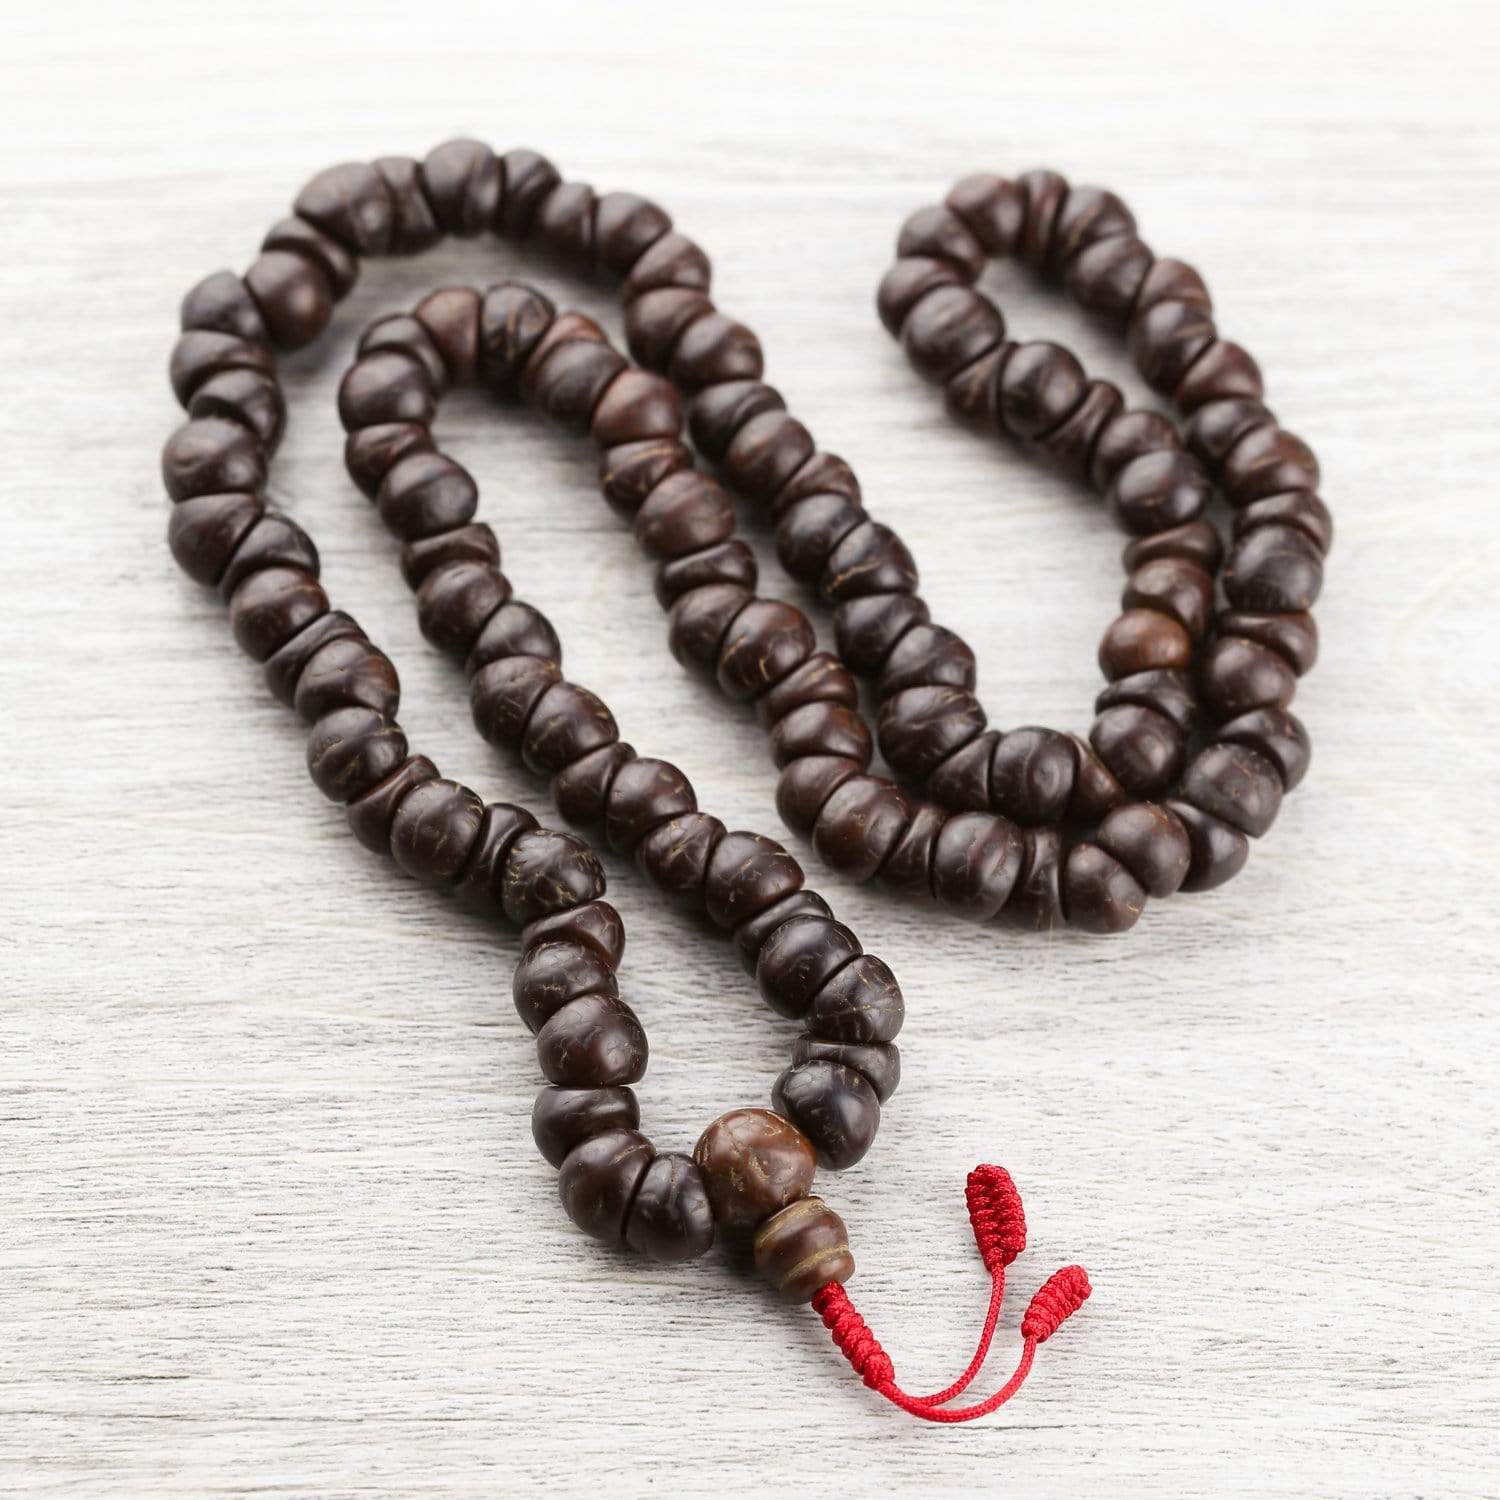 108 Authentic Bodhi Seed Mala Prayer Beads With Dorje and Skull Tassel, 108  Buddhist Meditation Mala Rosary, Natural Seed Necklace 